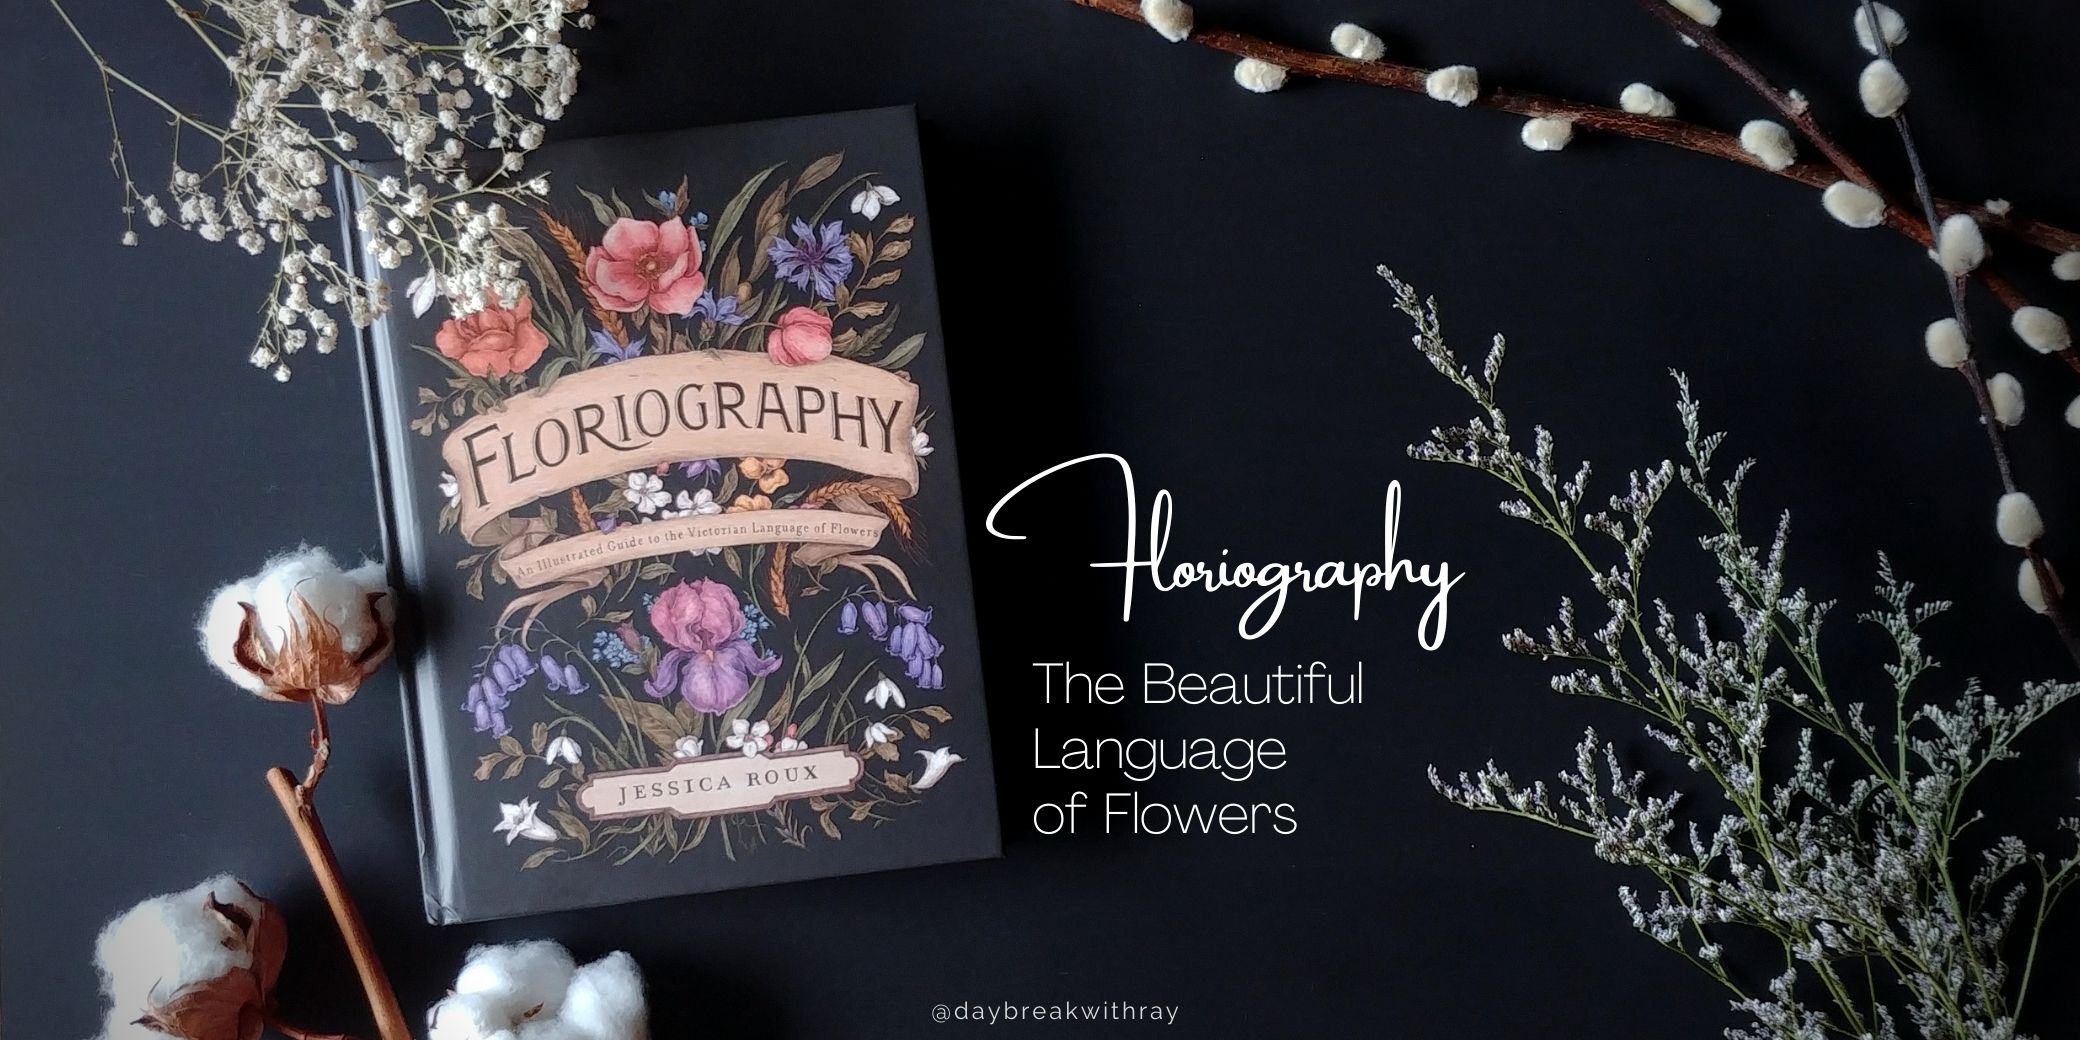 (Featured Image) Floriography The Beautiful Language of Flowers